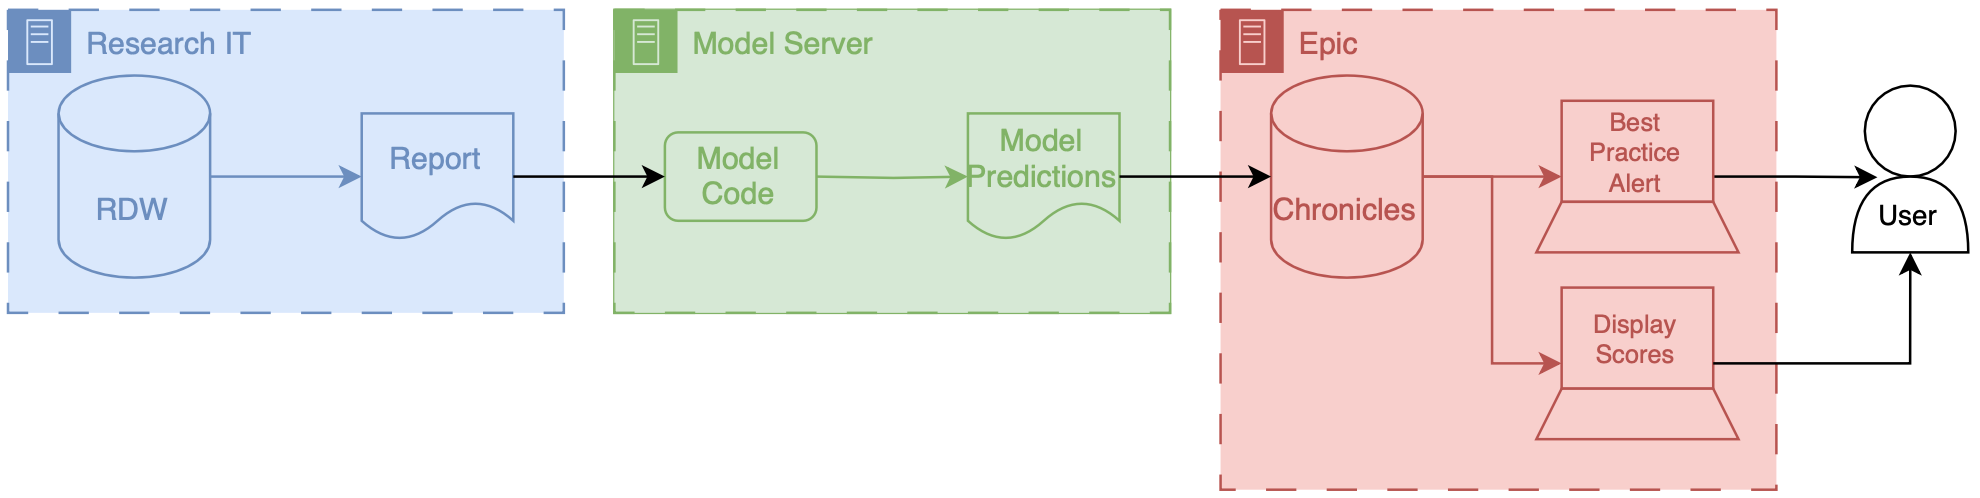 Architecture diagram for implementing custom models served outside of an EMR vendor's system. Research data warehouse generates reports that are then sent to the external model implementation environment, the model generates predictions which are then passed to the EMR system.